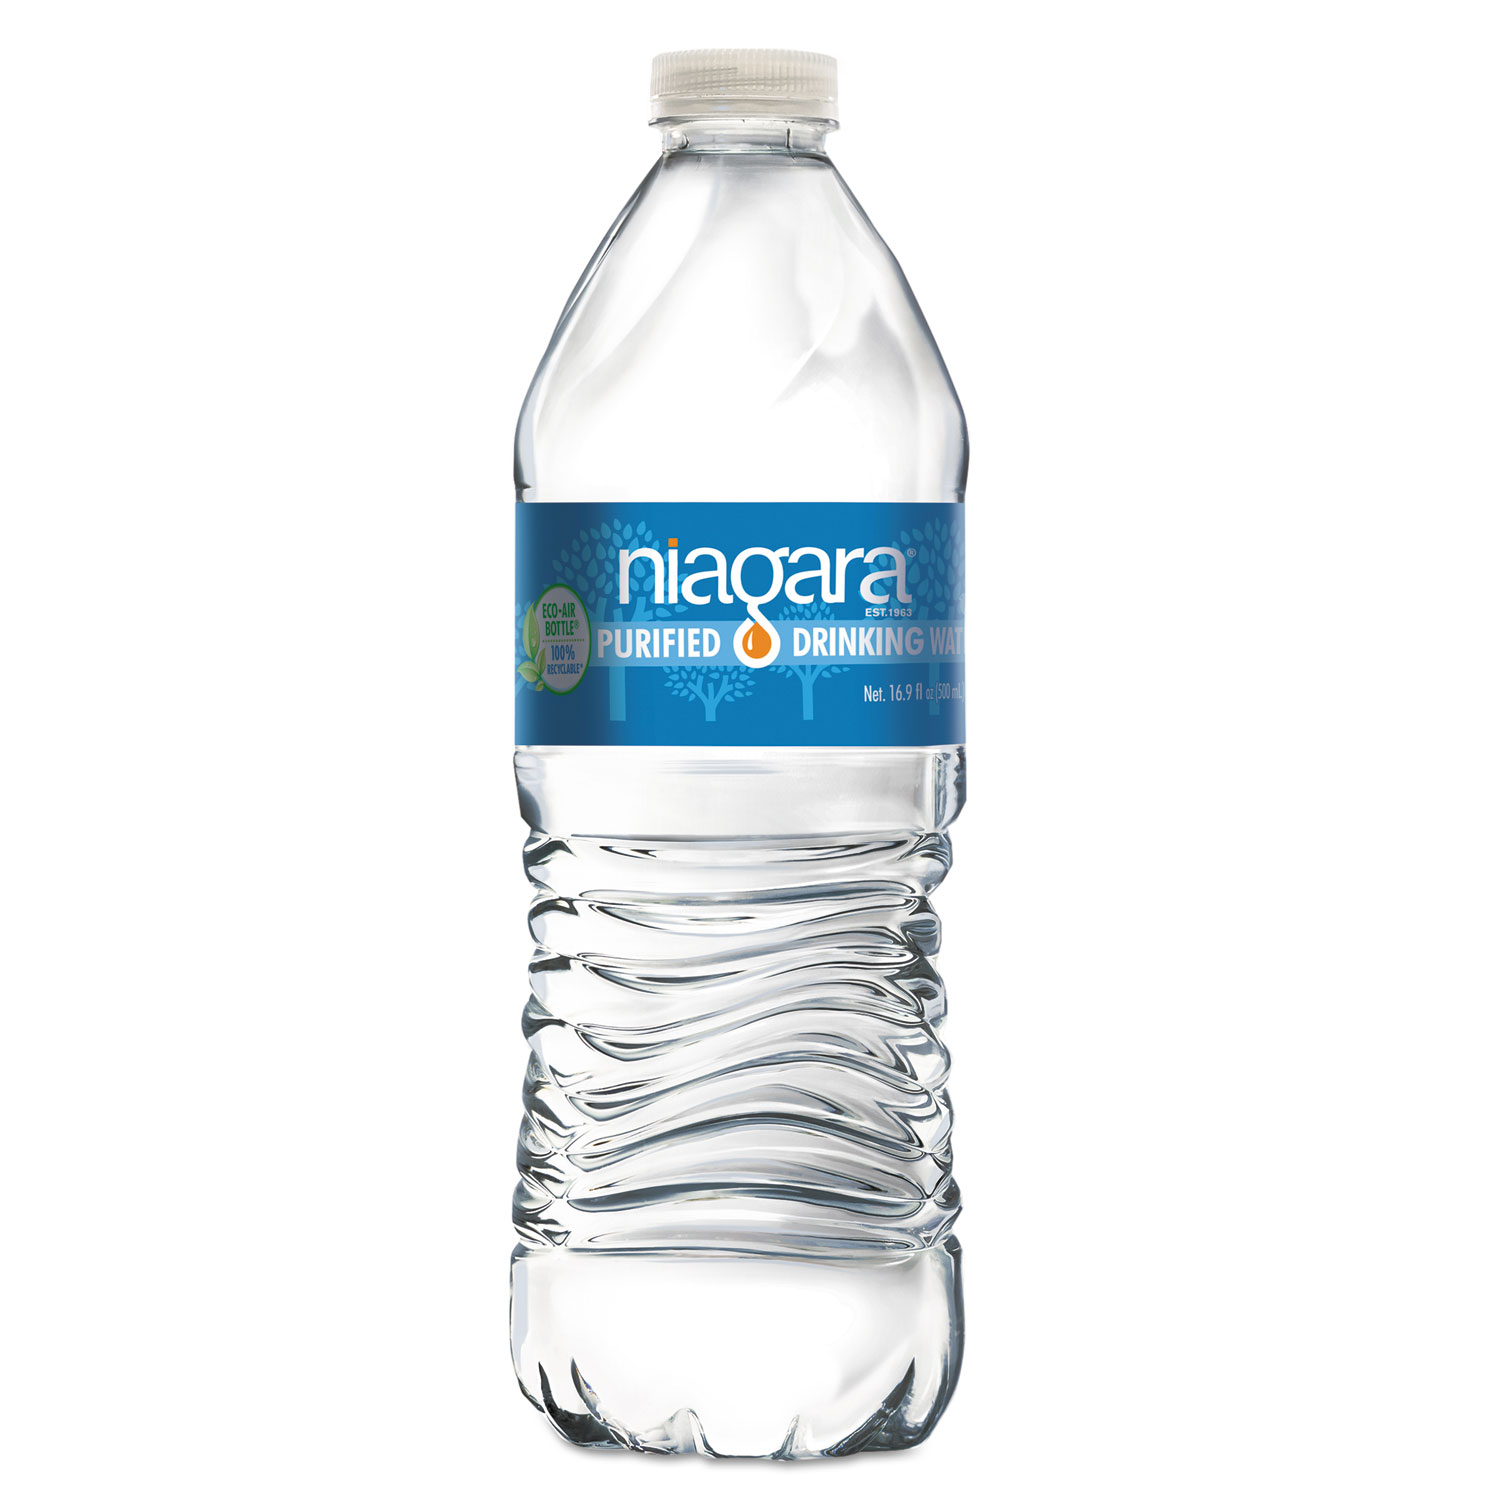 Niagara 24-Pack 8-fl oz Purified Bottled Water in the Water department at